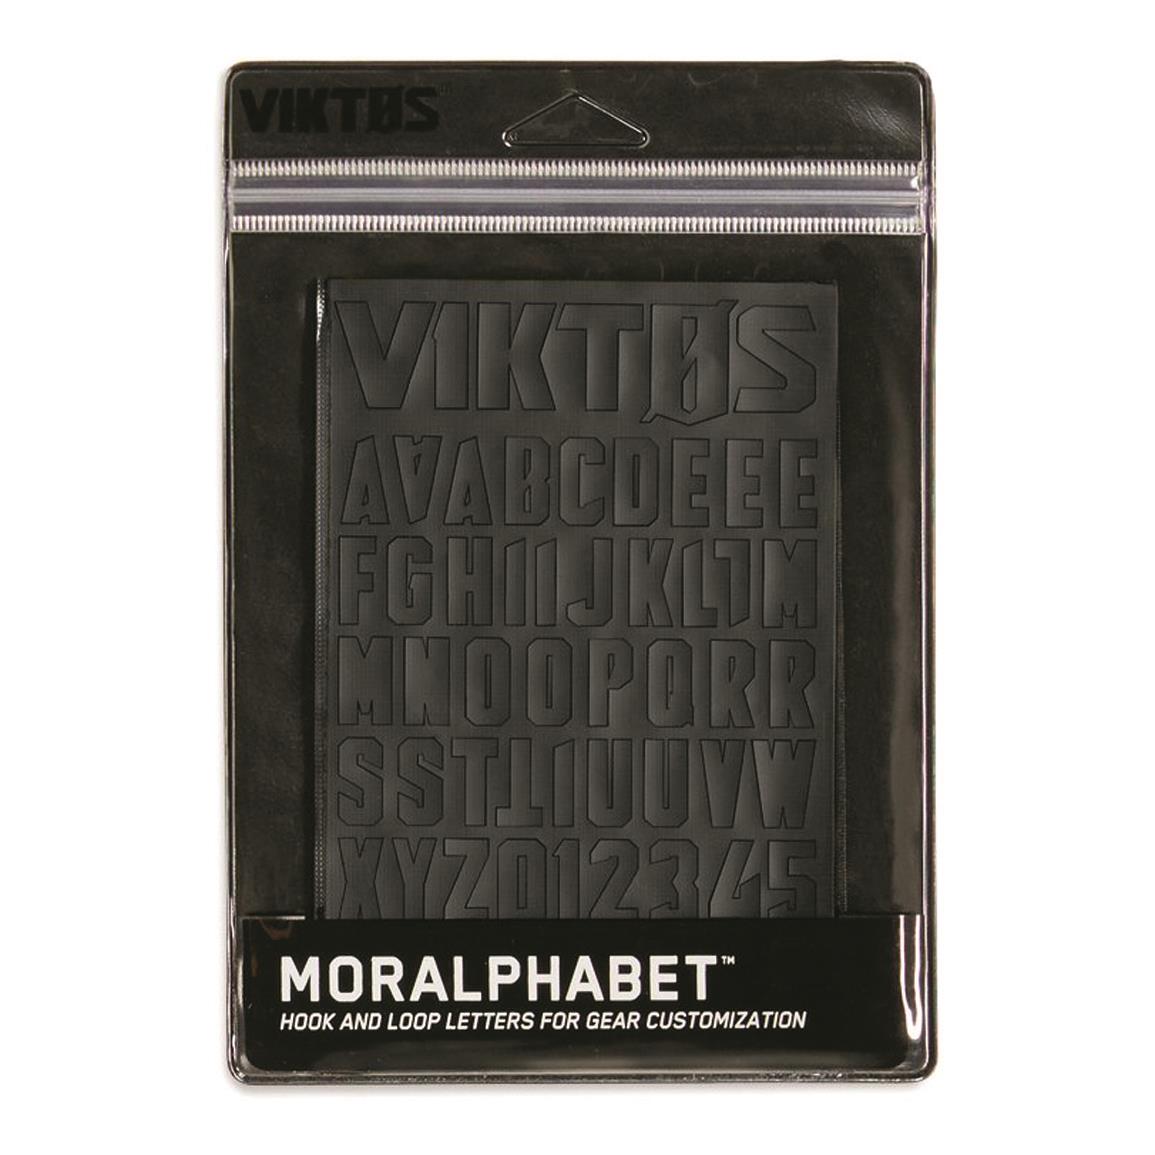 Viktos Moralphabet Hook-and-Loop Letter Patches, Nightfjall